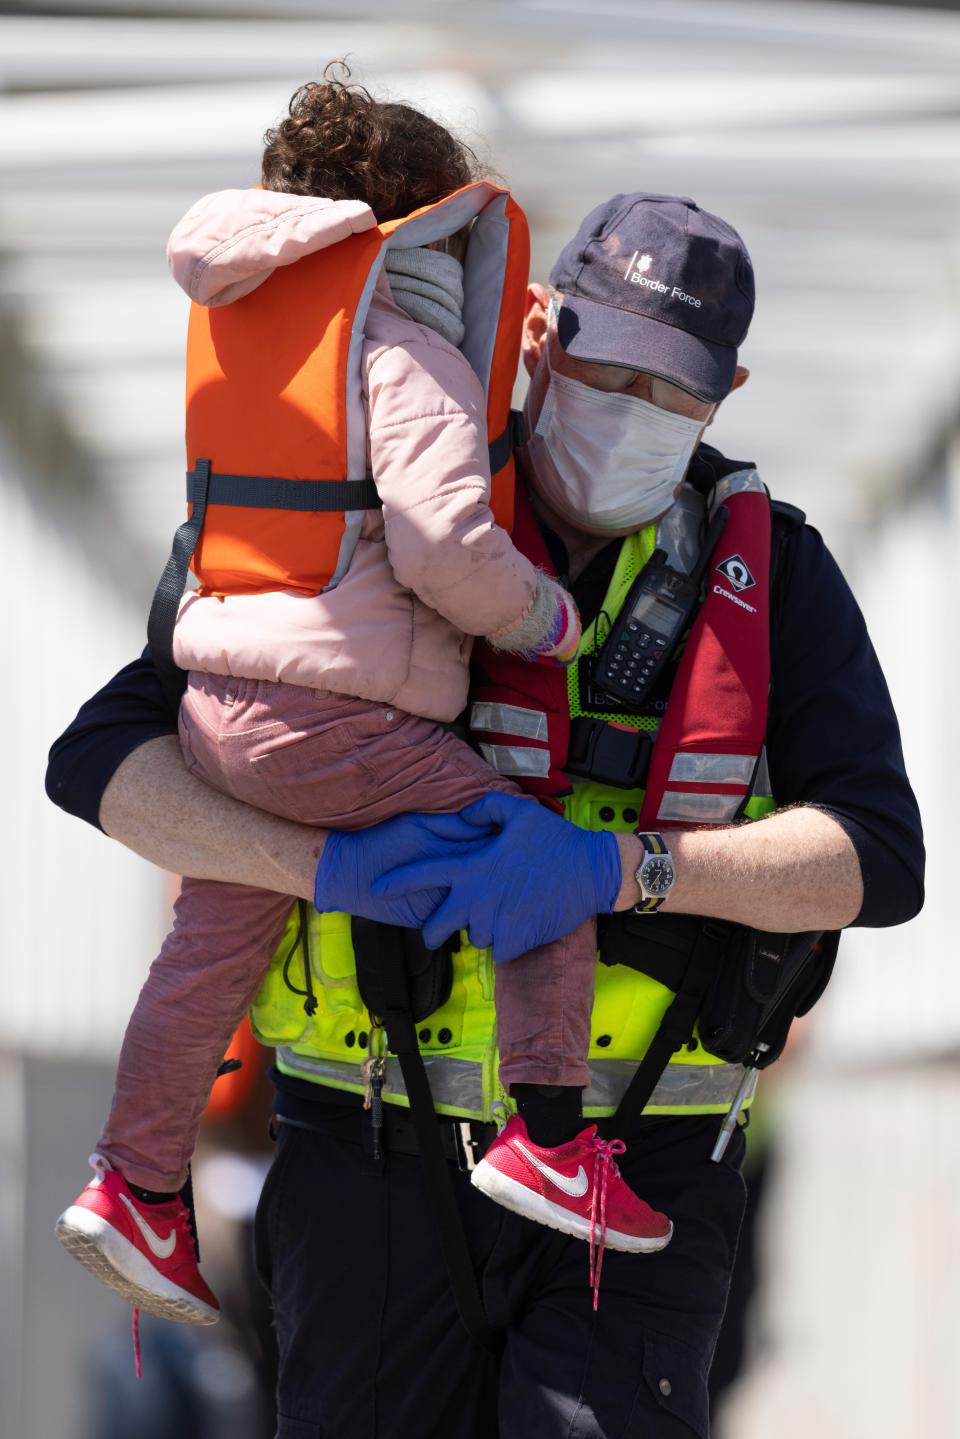 A Border Force official holds a young girl that arrived with other migrants after they were picked up in a dinghy in the English Channel (Getty Images)